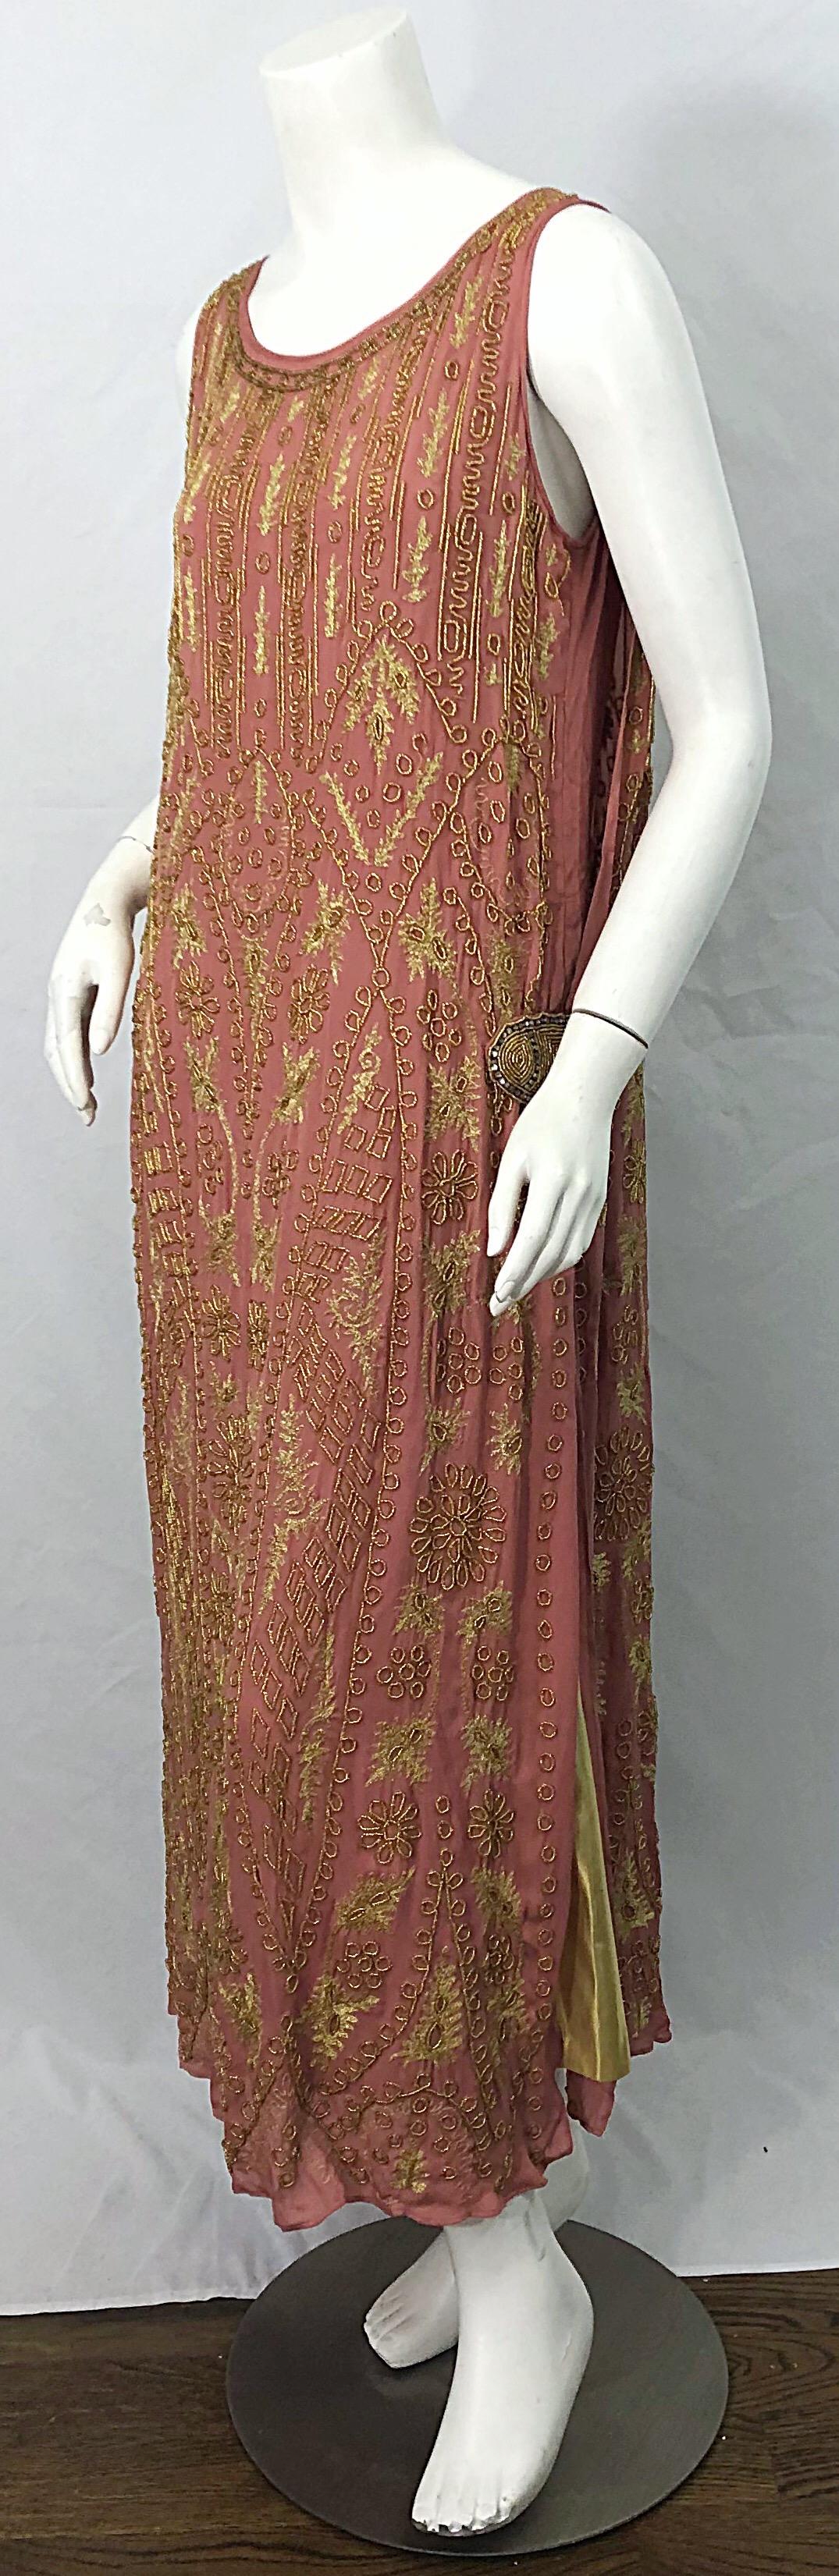 1920s French Couture Pink + Gold Beaded Gatsby Roaring 20s Vintage Flapper Dress 3